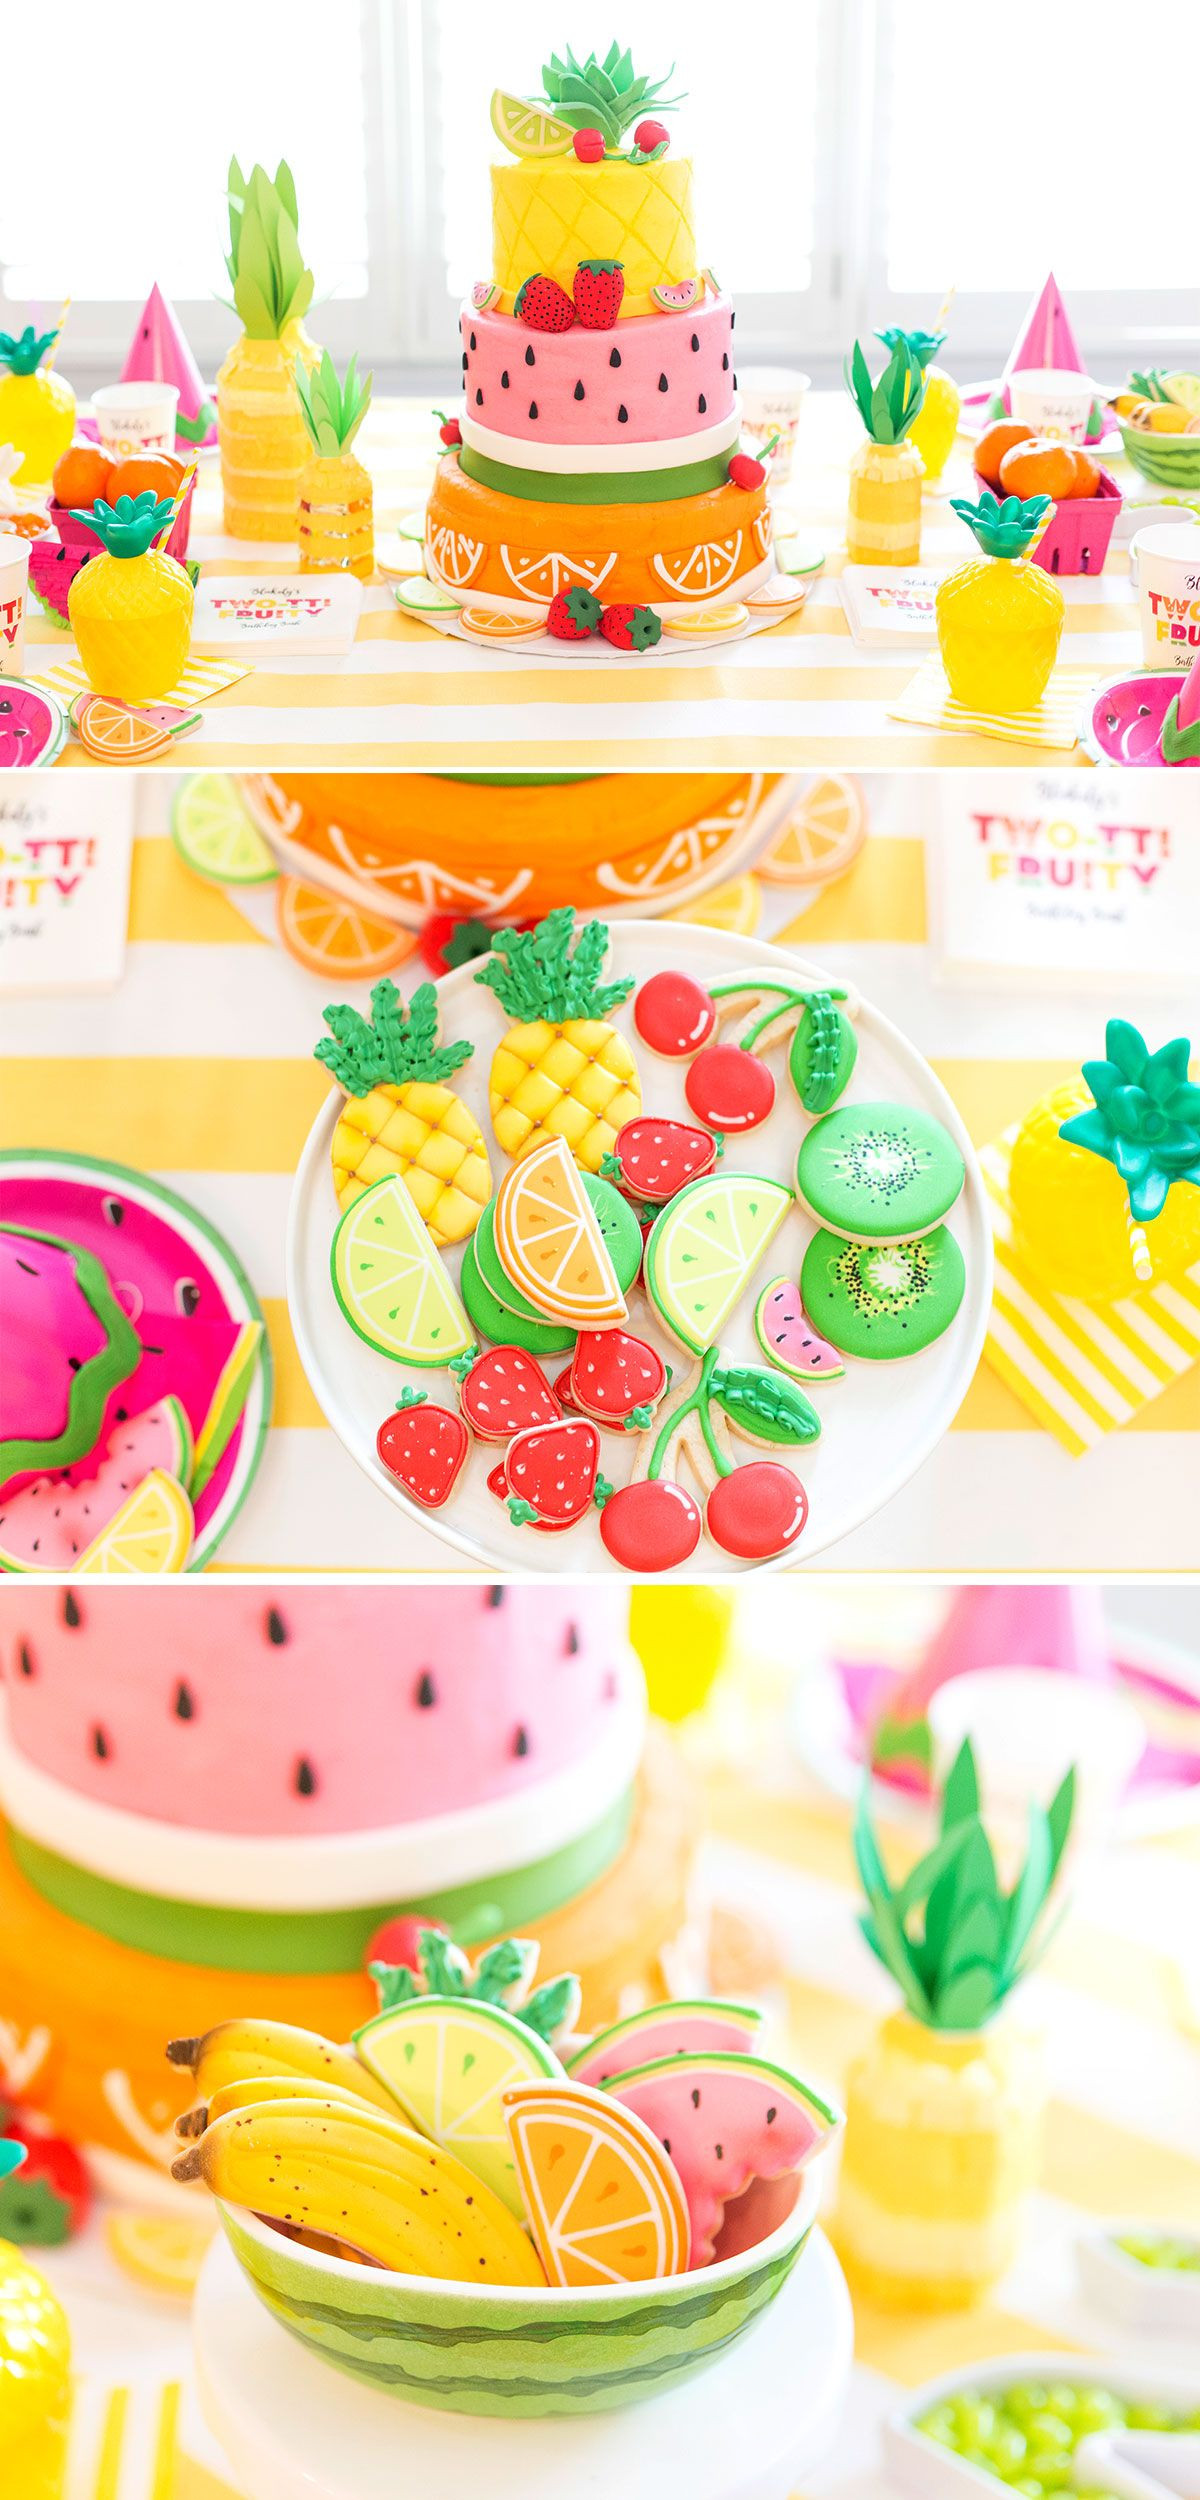 Toddler Summer Birthday Party Ideas
 Two tti Fruity Birthday Party Blakely Turns 2